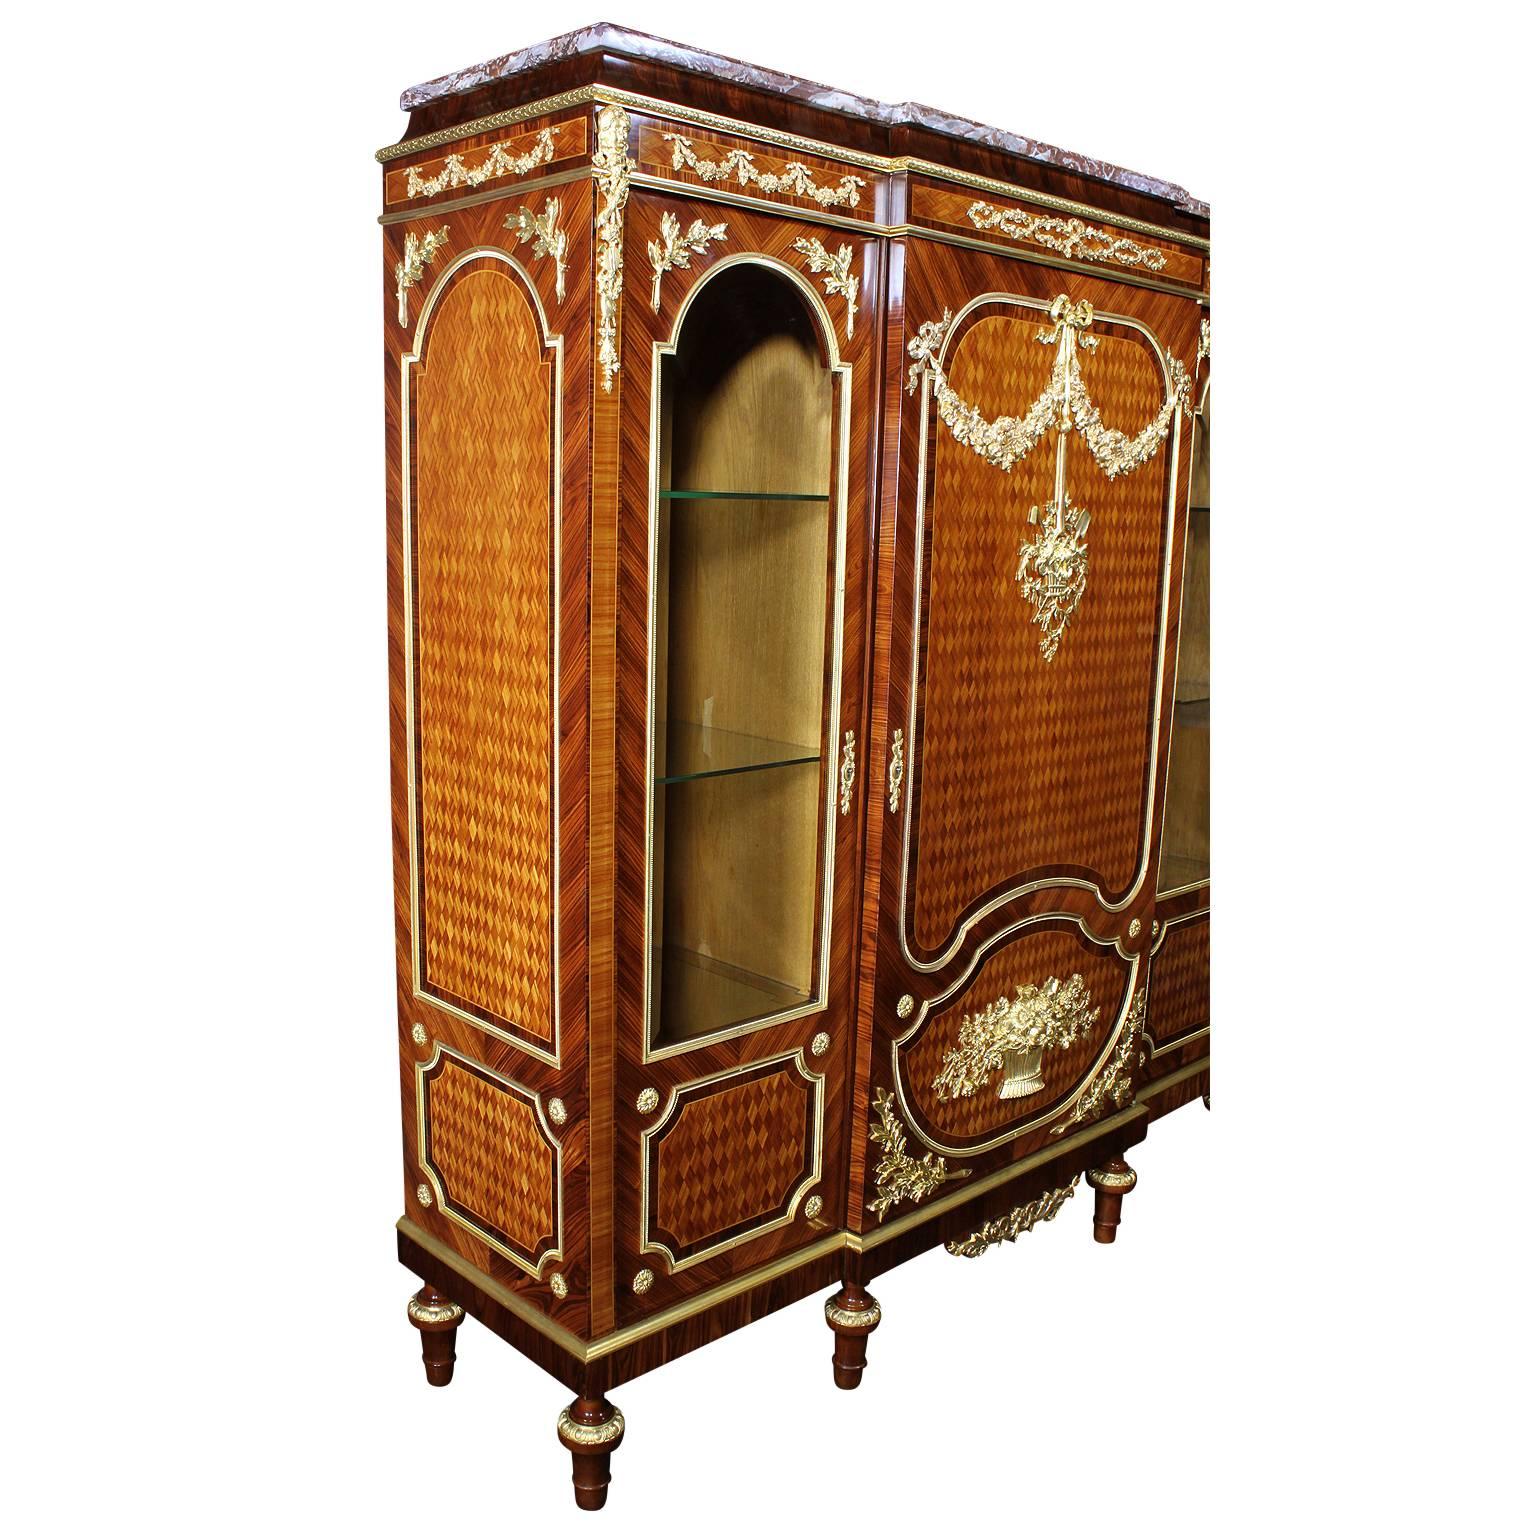 French 19th-20th Century Louis XVI Style Mahogany, Kingwood Parquetry Vitrine For Sale 1